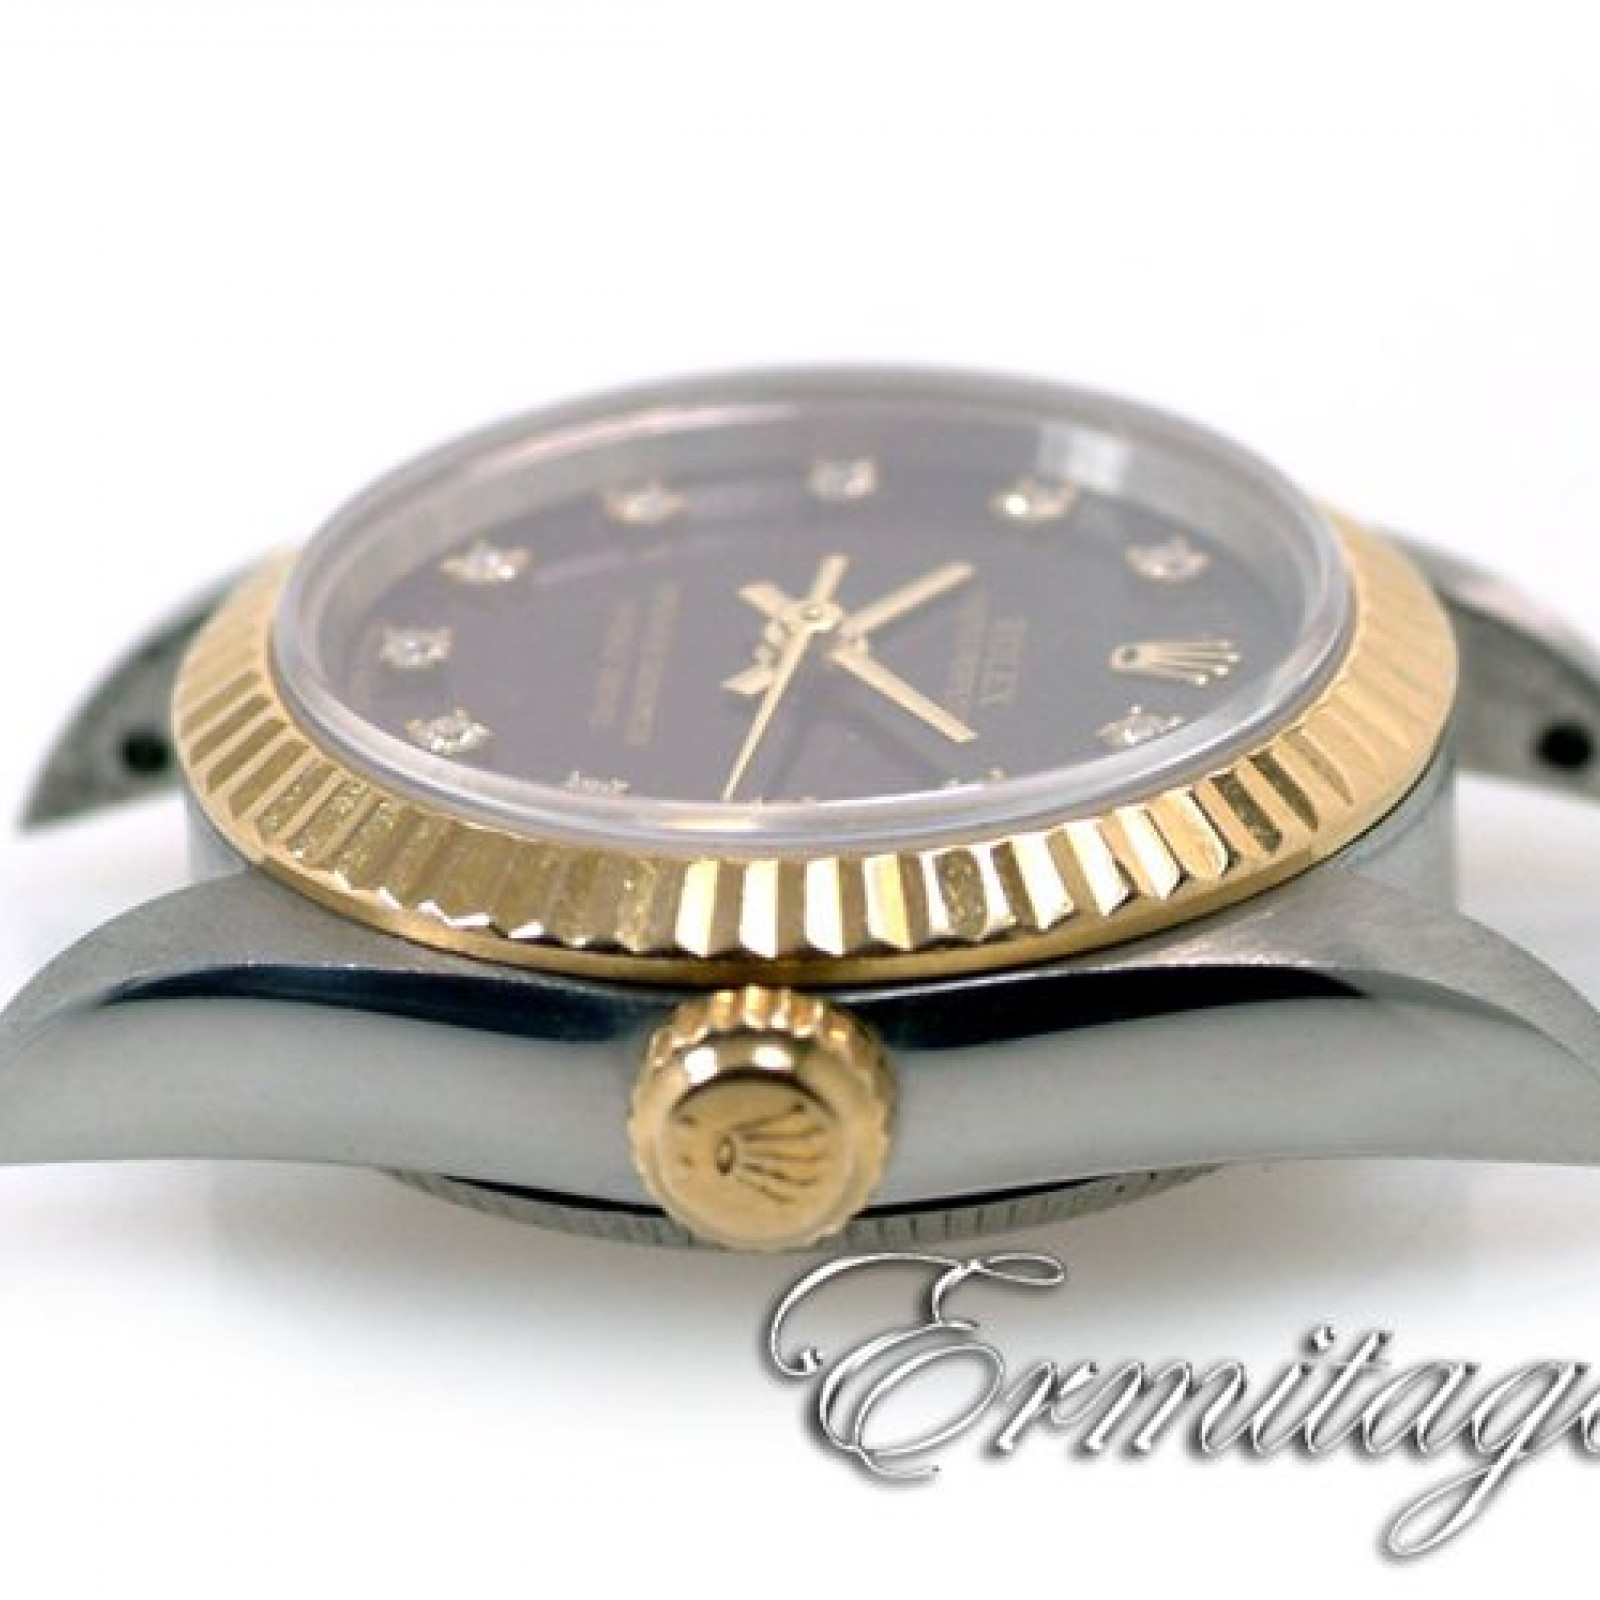 Diamond Rolex Oyster Perpetual 76193 Gold & Steel